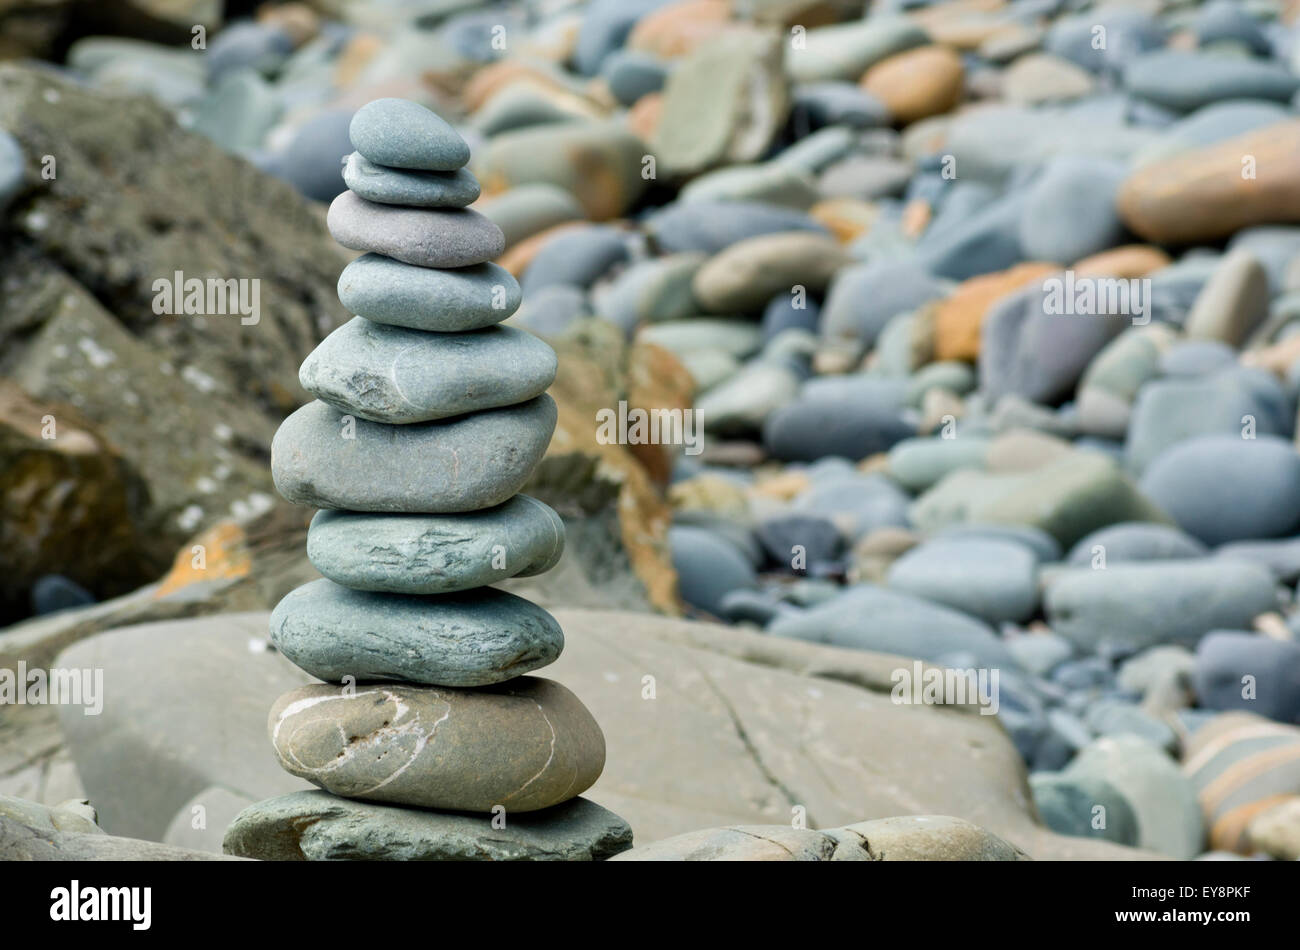 Pile of Pebbles Stacked On Top Of One Another Stock Photo